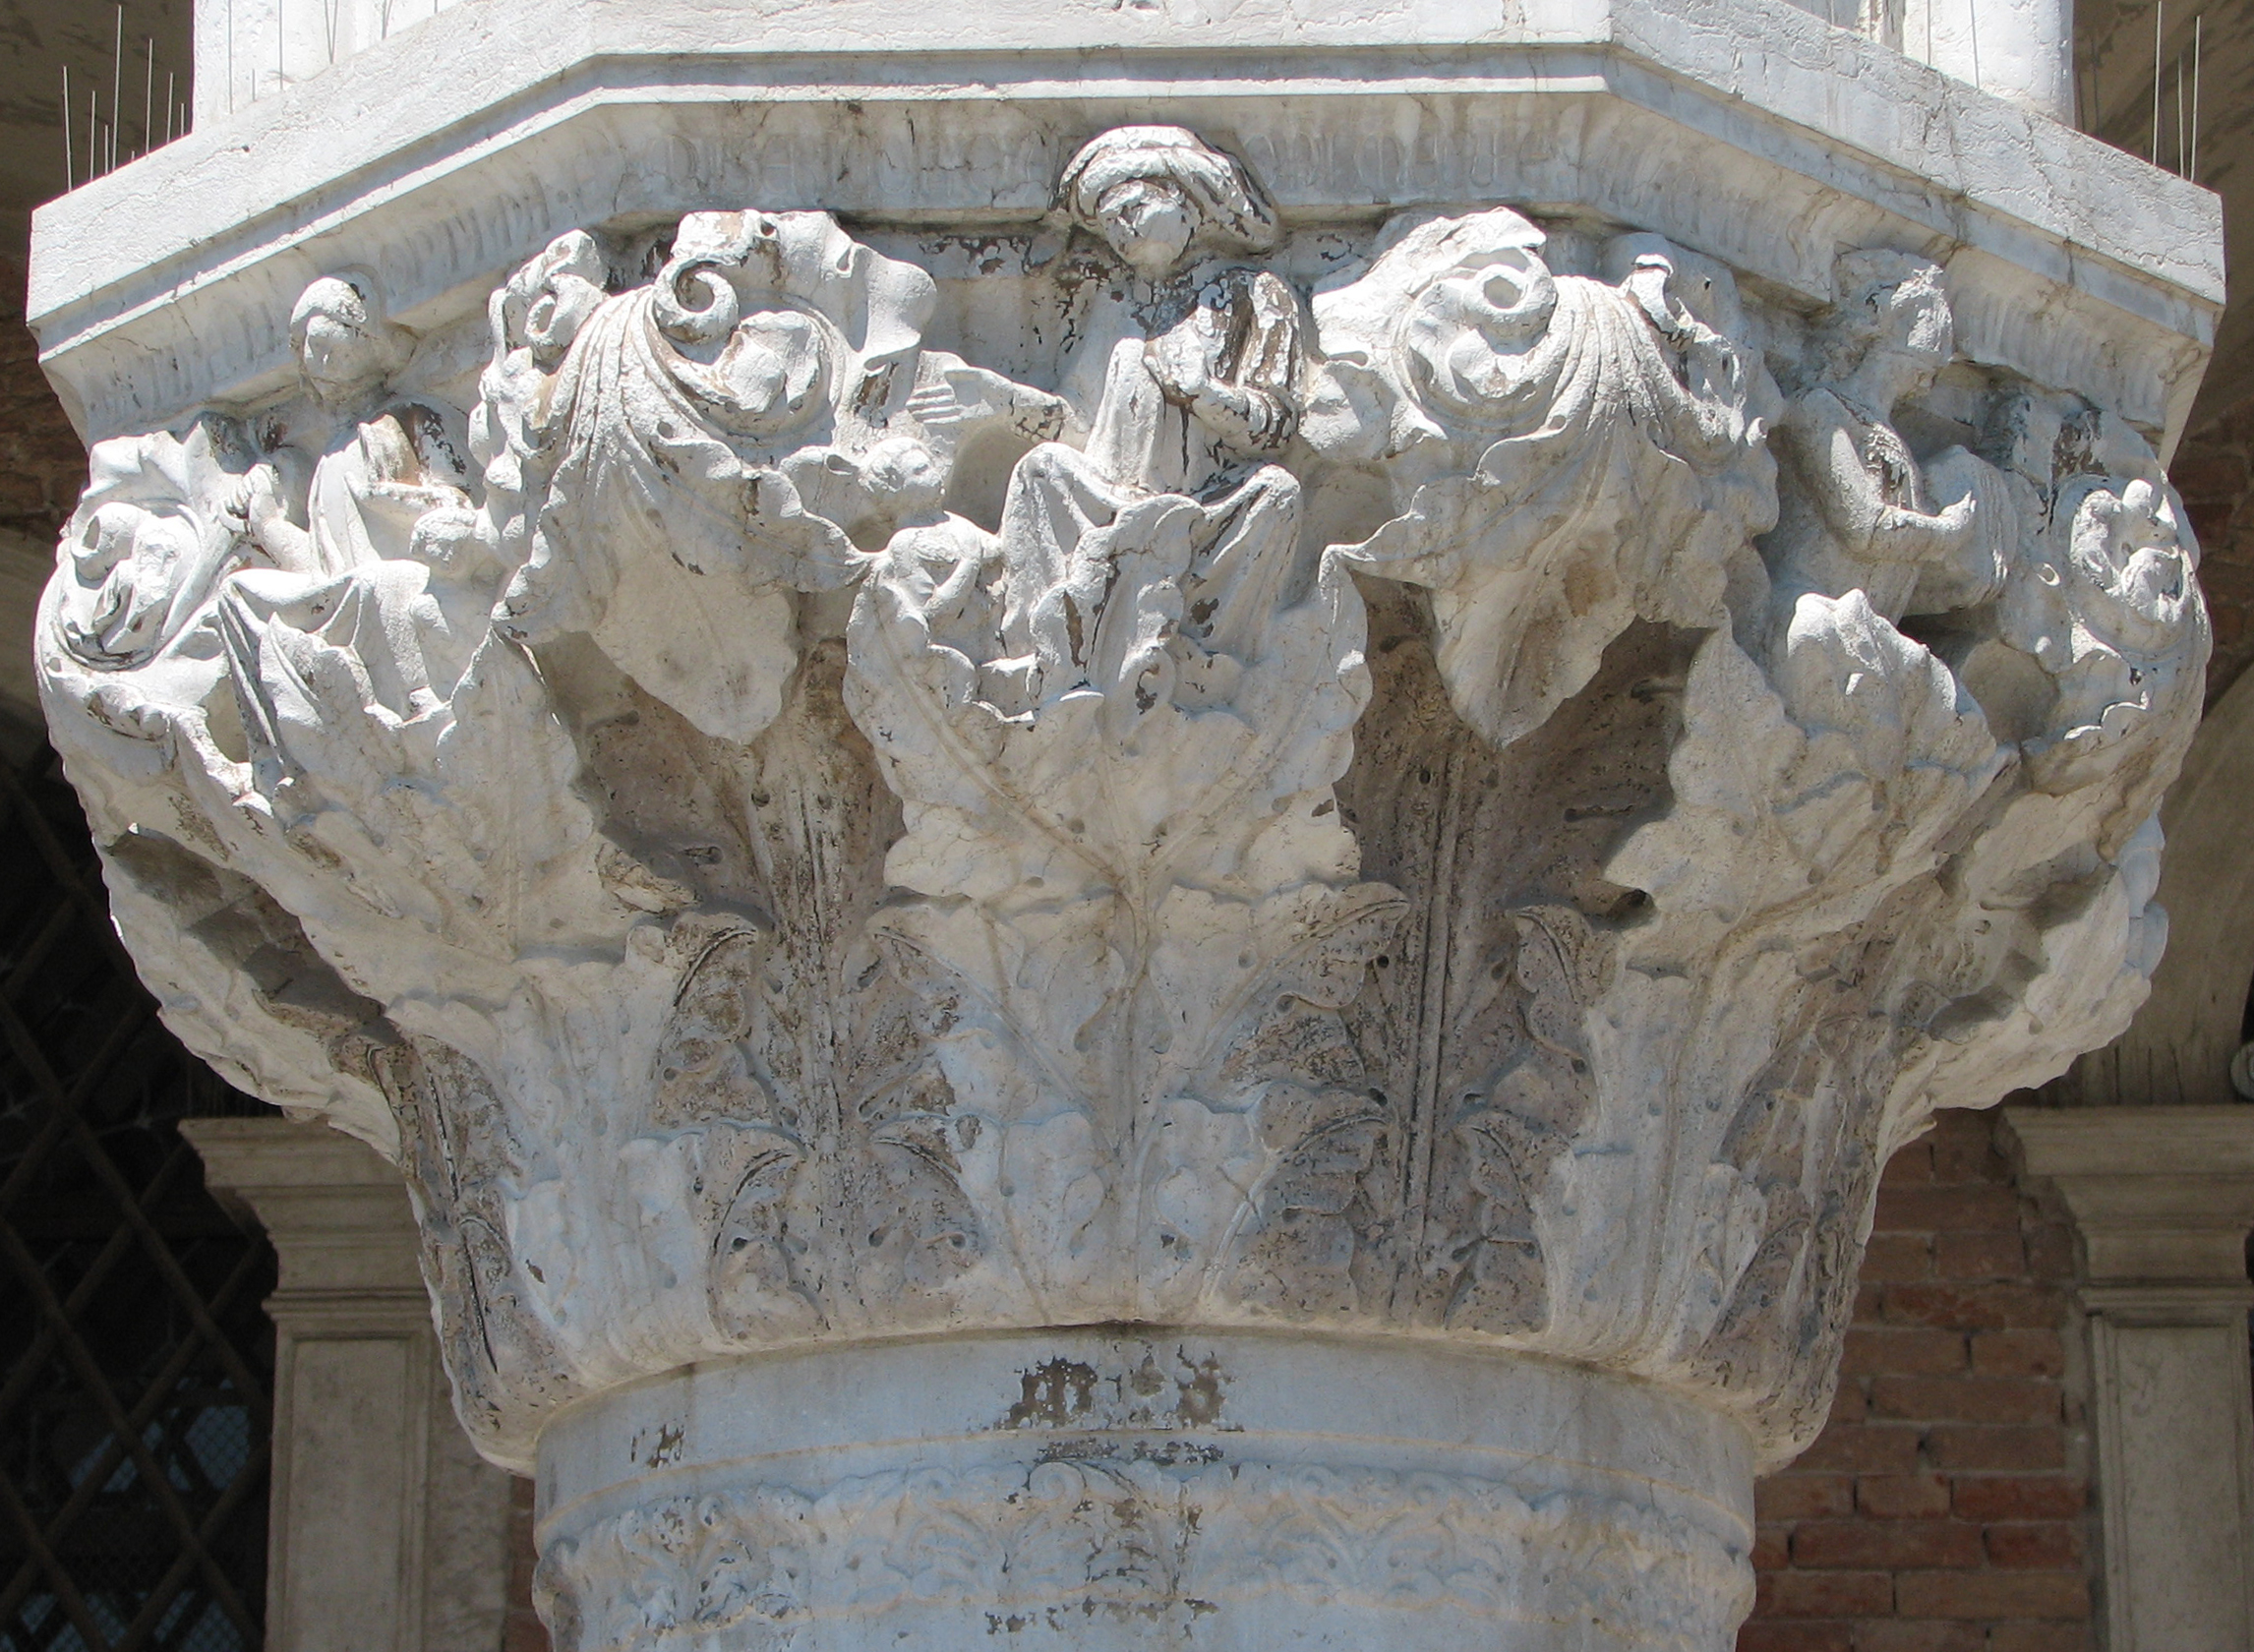 Detail of 12th capital in its current state Astinecia (Abstinentia), side 8, left; Miseria (Misericordia), side 1, centre; Alacritas, side 2, right.